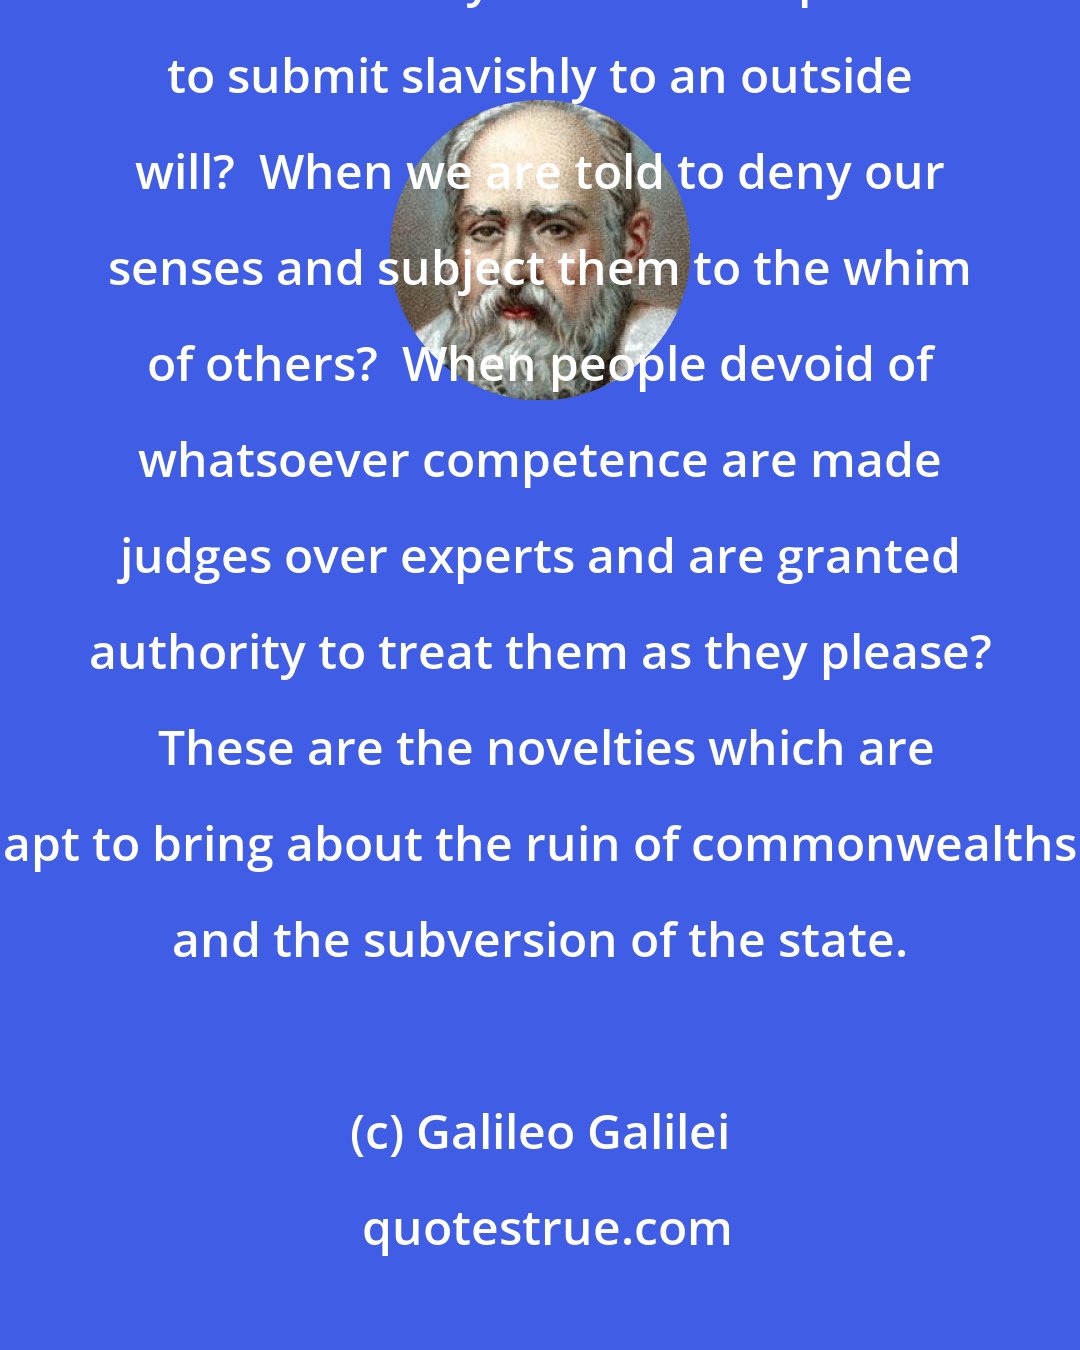 Galileo Galilei: And who can doubt that it will lead to the worst disorders when minds created free by God are compelled to submit slavishly to an outside will?  When we are told to deny our senses and subject them to the whim of others?  When people devoid of whatsoever competence are made judges over experts and are granted authority to treat them as they please?  These are the novelties which are apt to bring about the ruin of commonwealths and the subversion of the state.